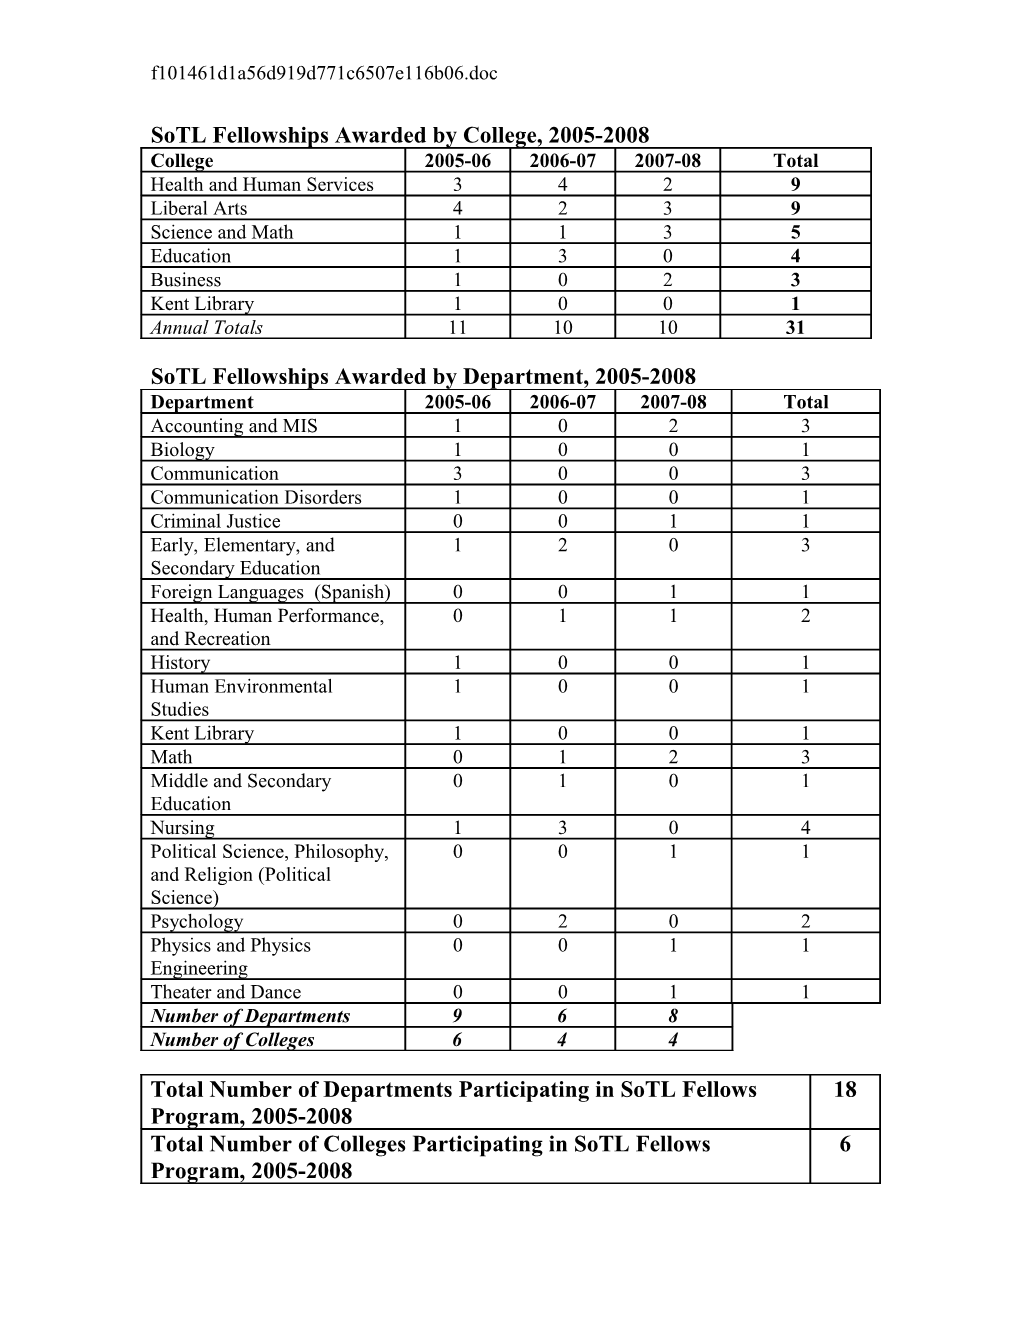 Sotl Fellowships Awarded by College, 2005-2008